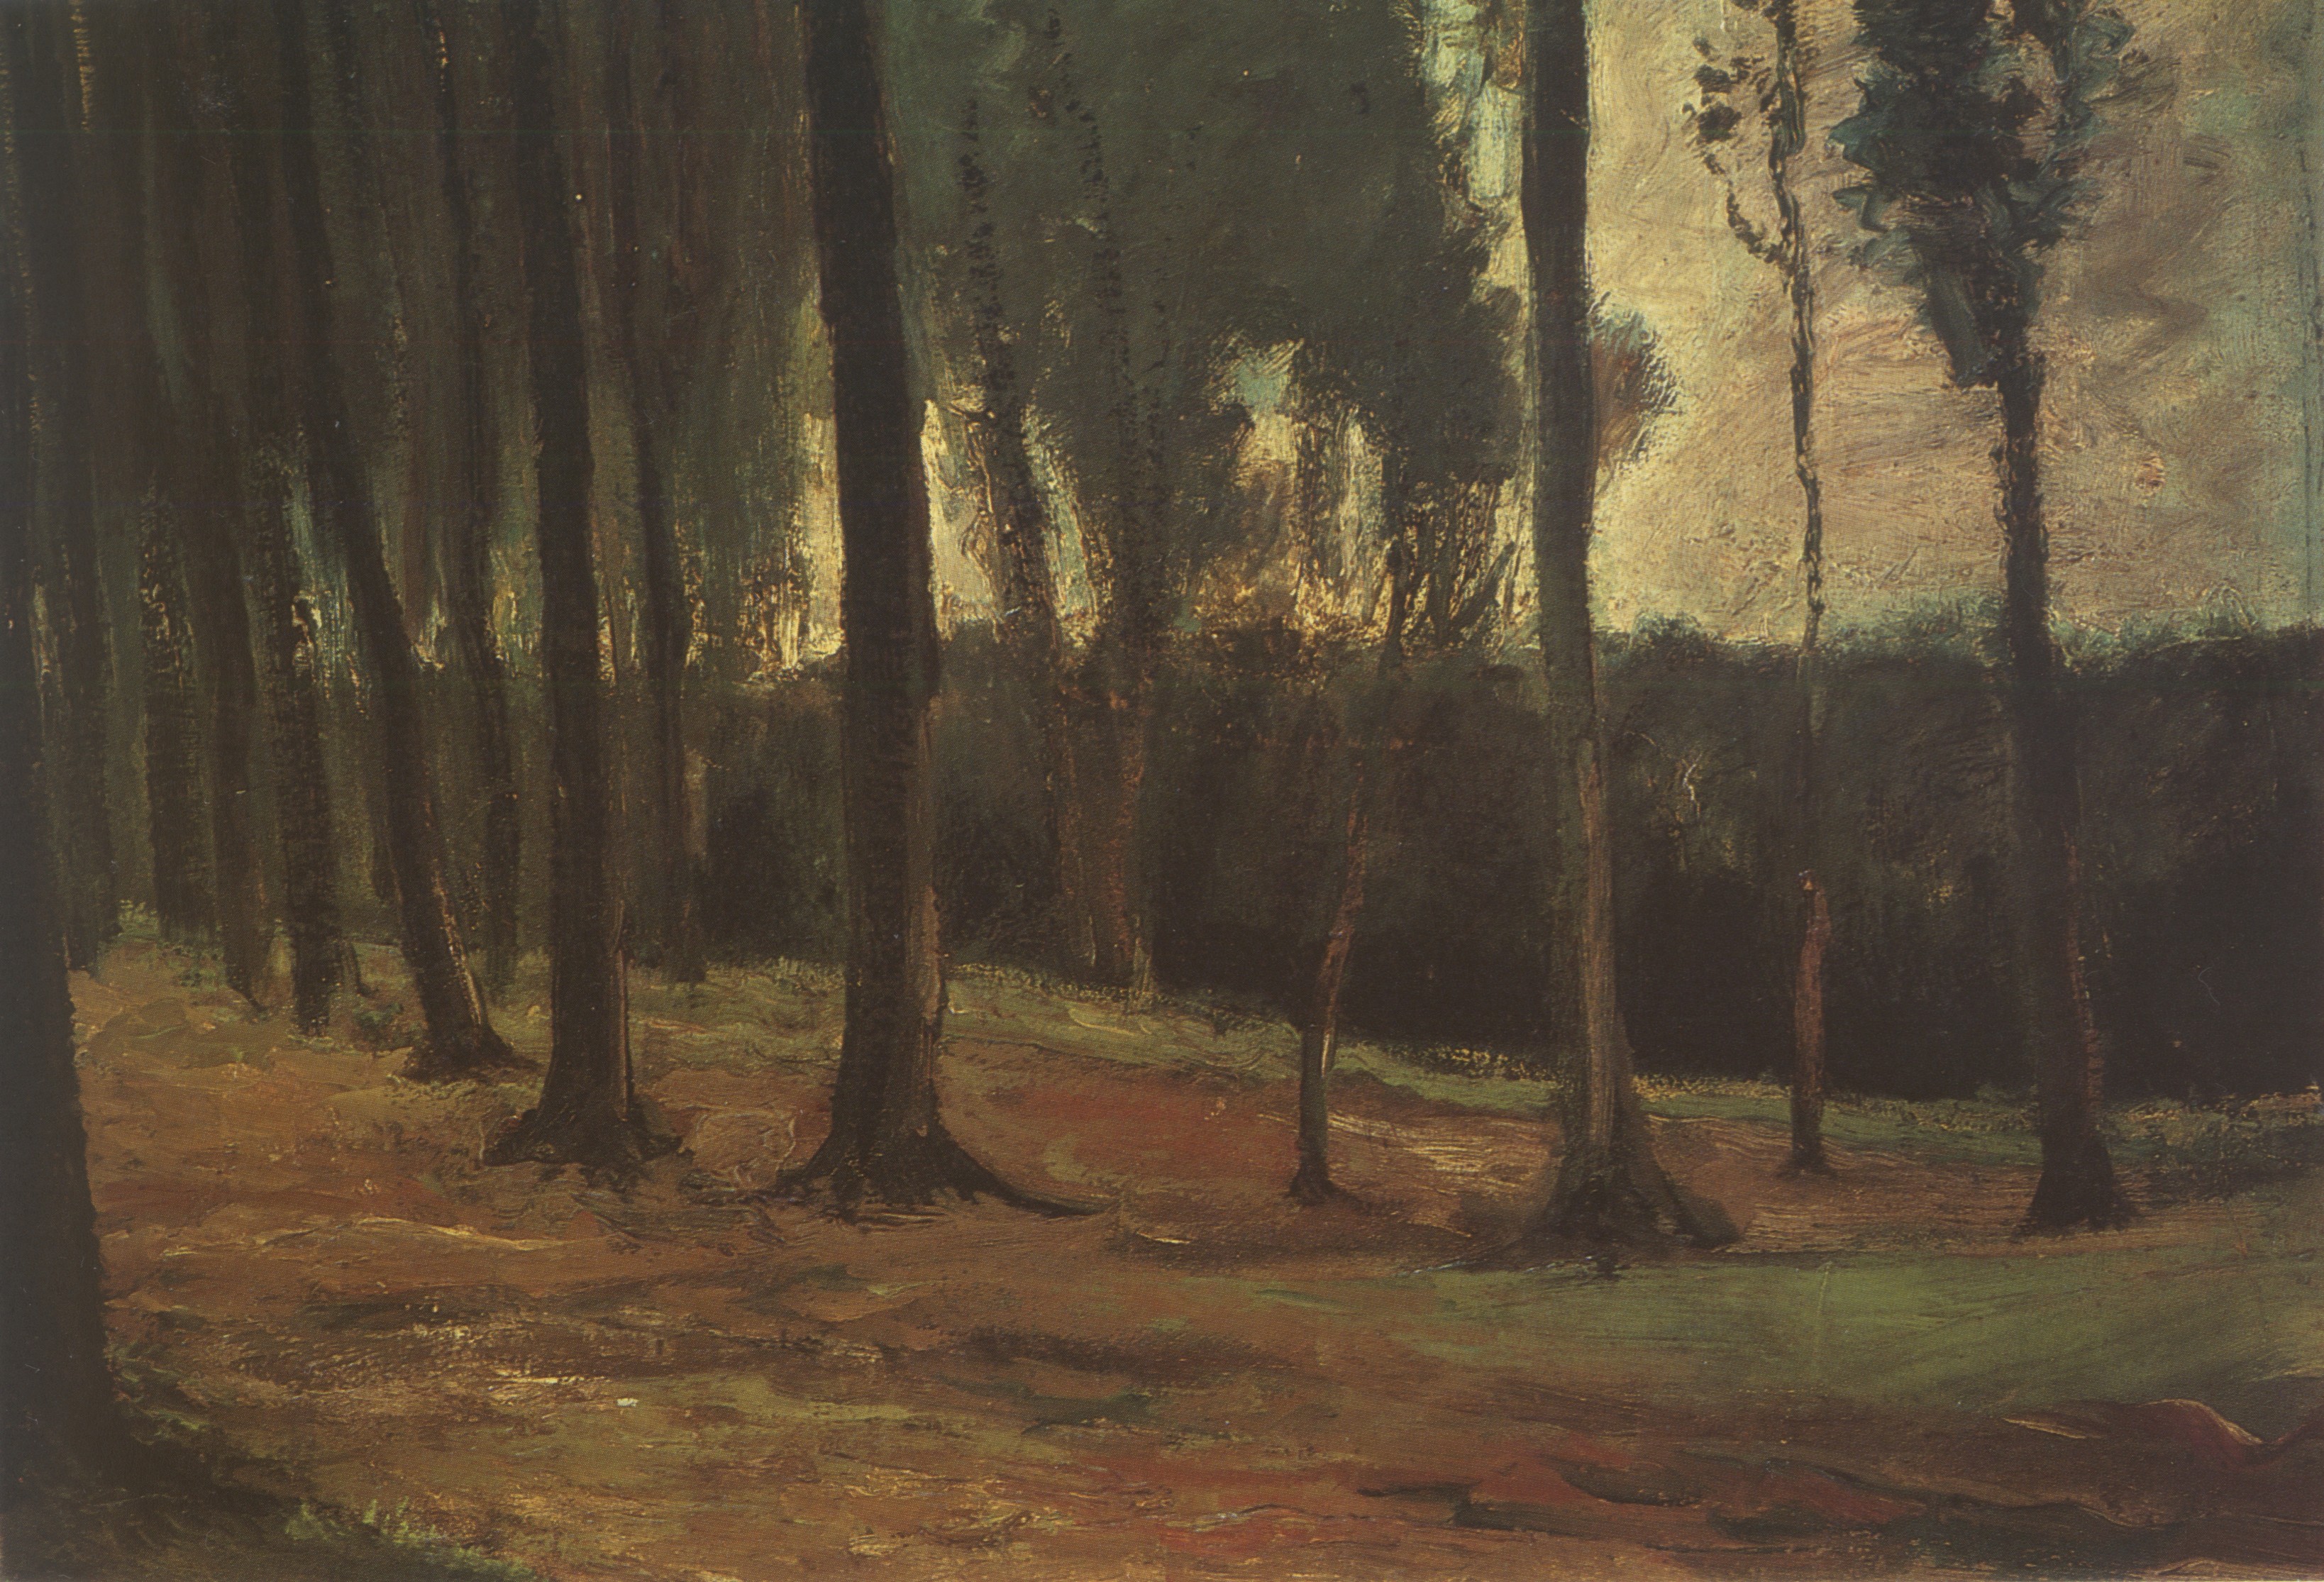 792 paintings 600dpi - 013. A Forests Fringe 1882.jpg